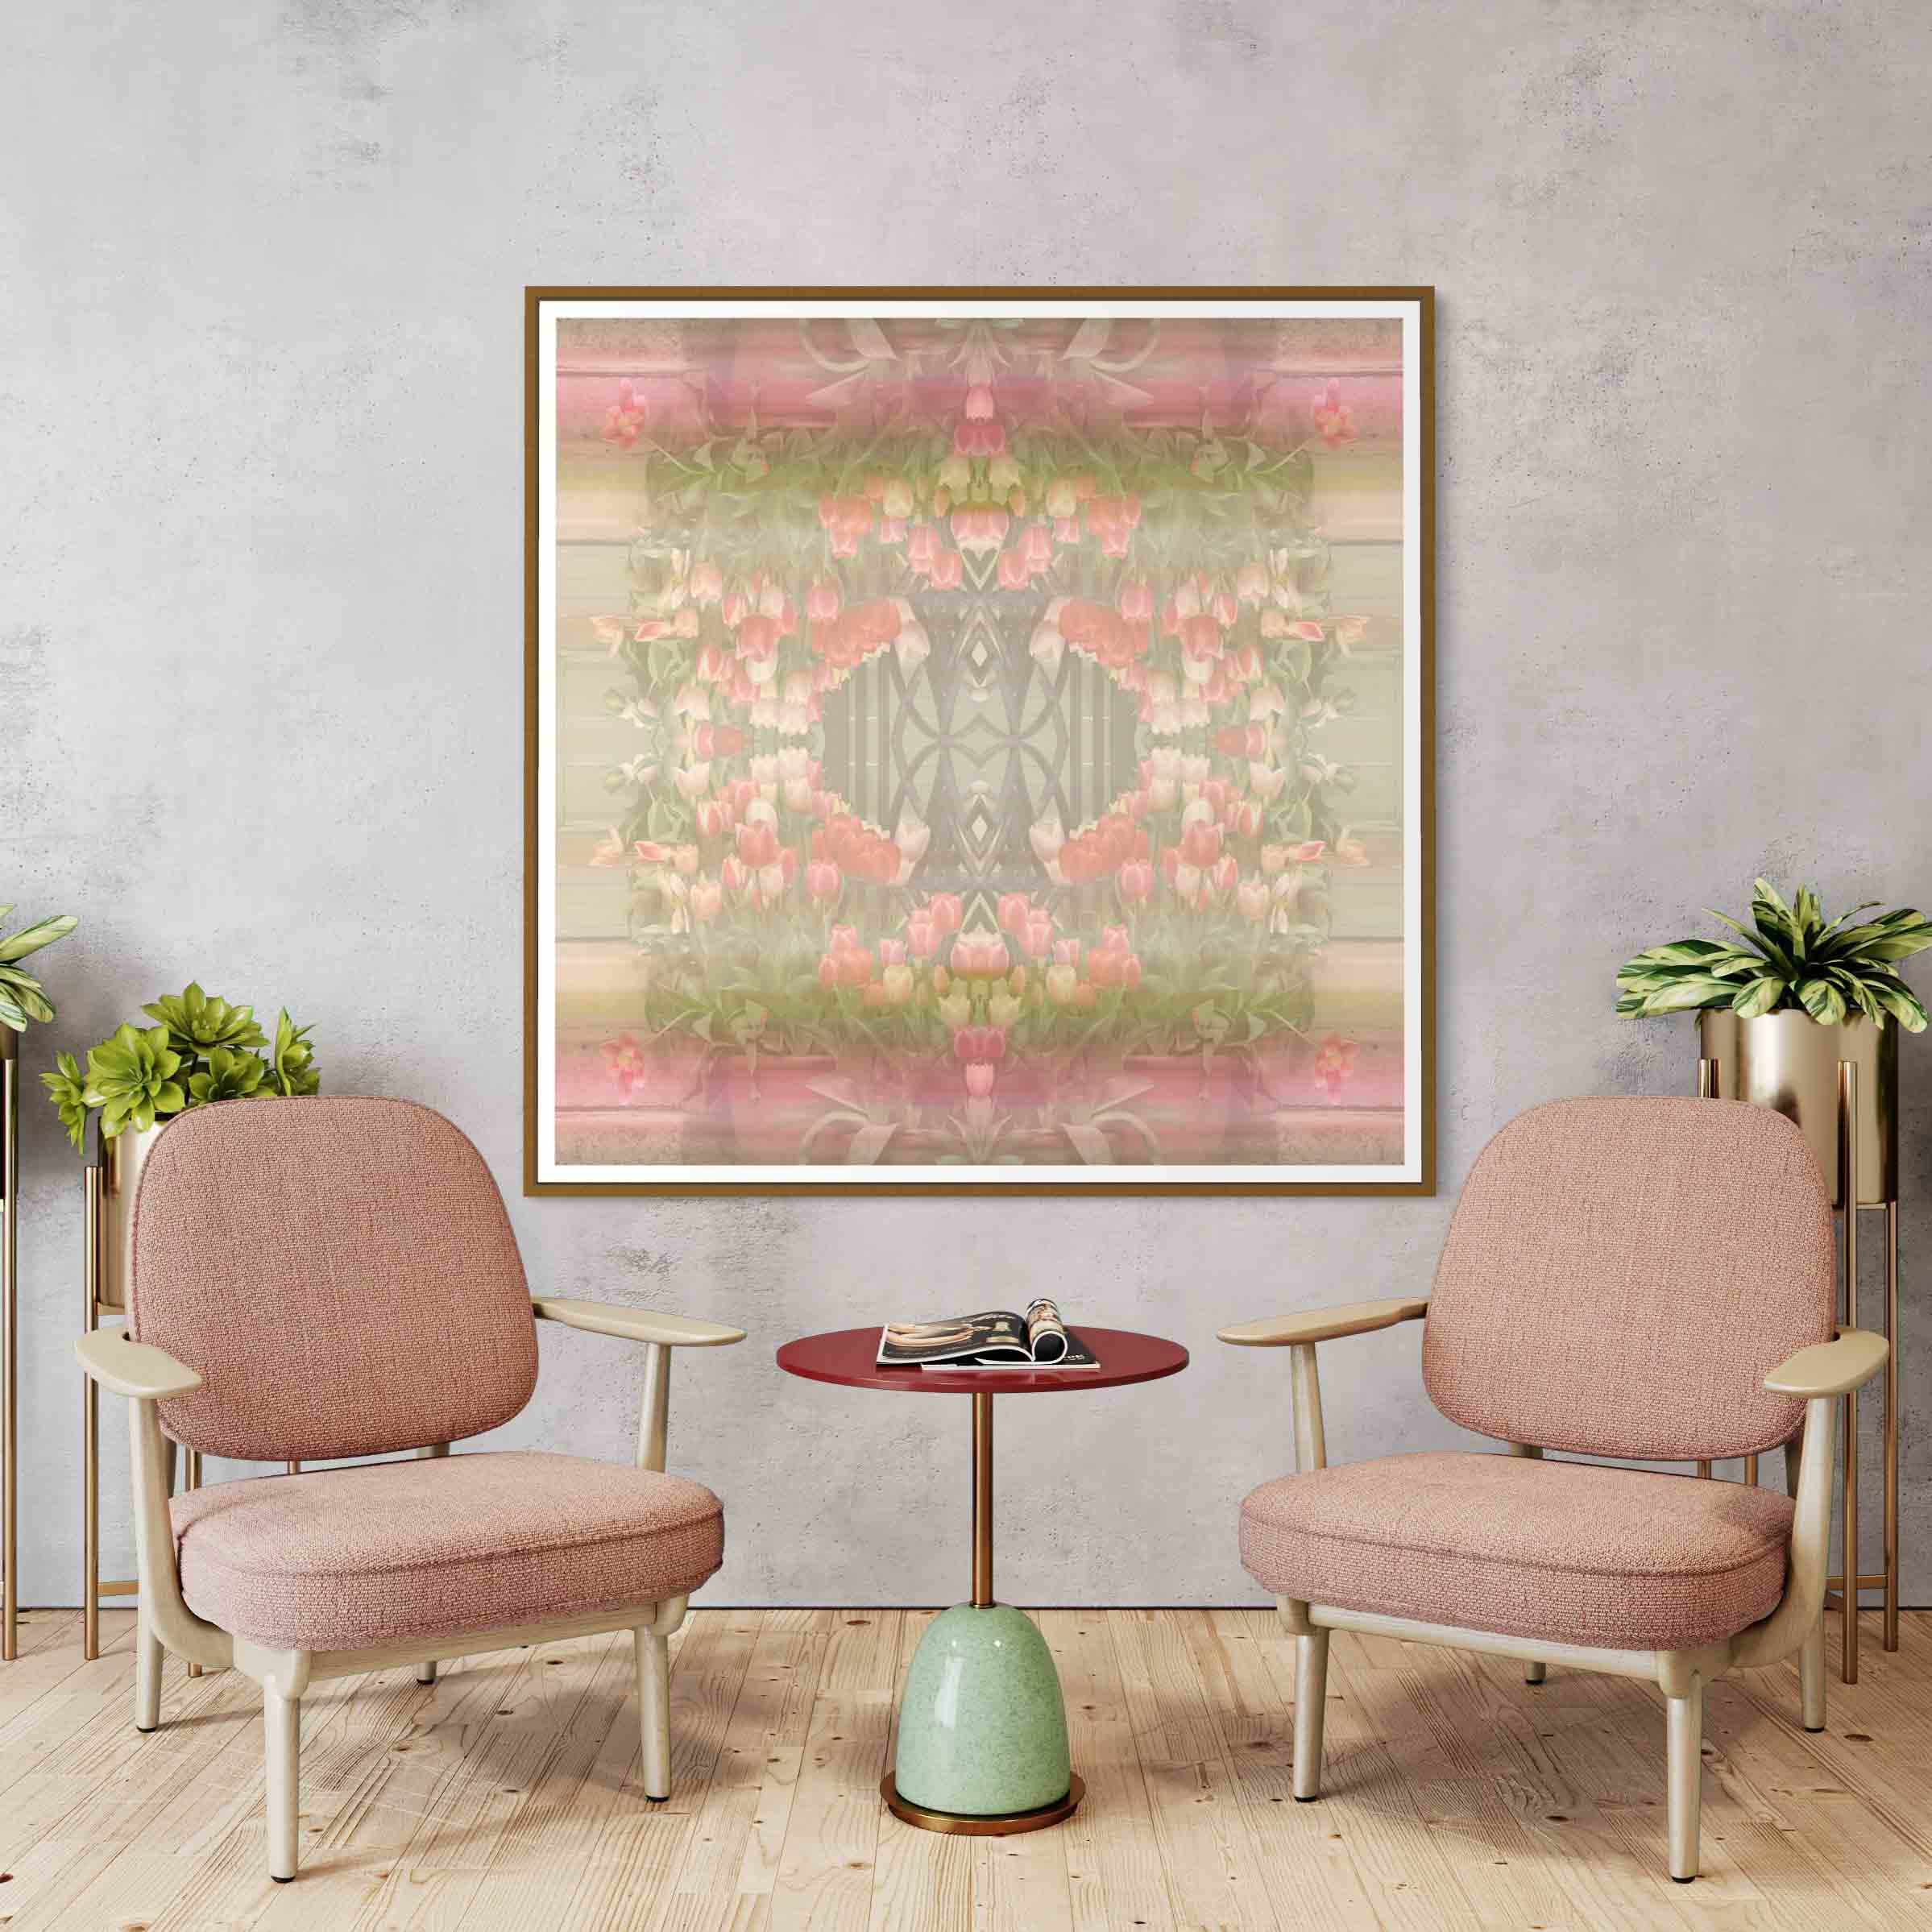 A couple of pink chairs in front of a painting.